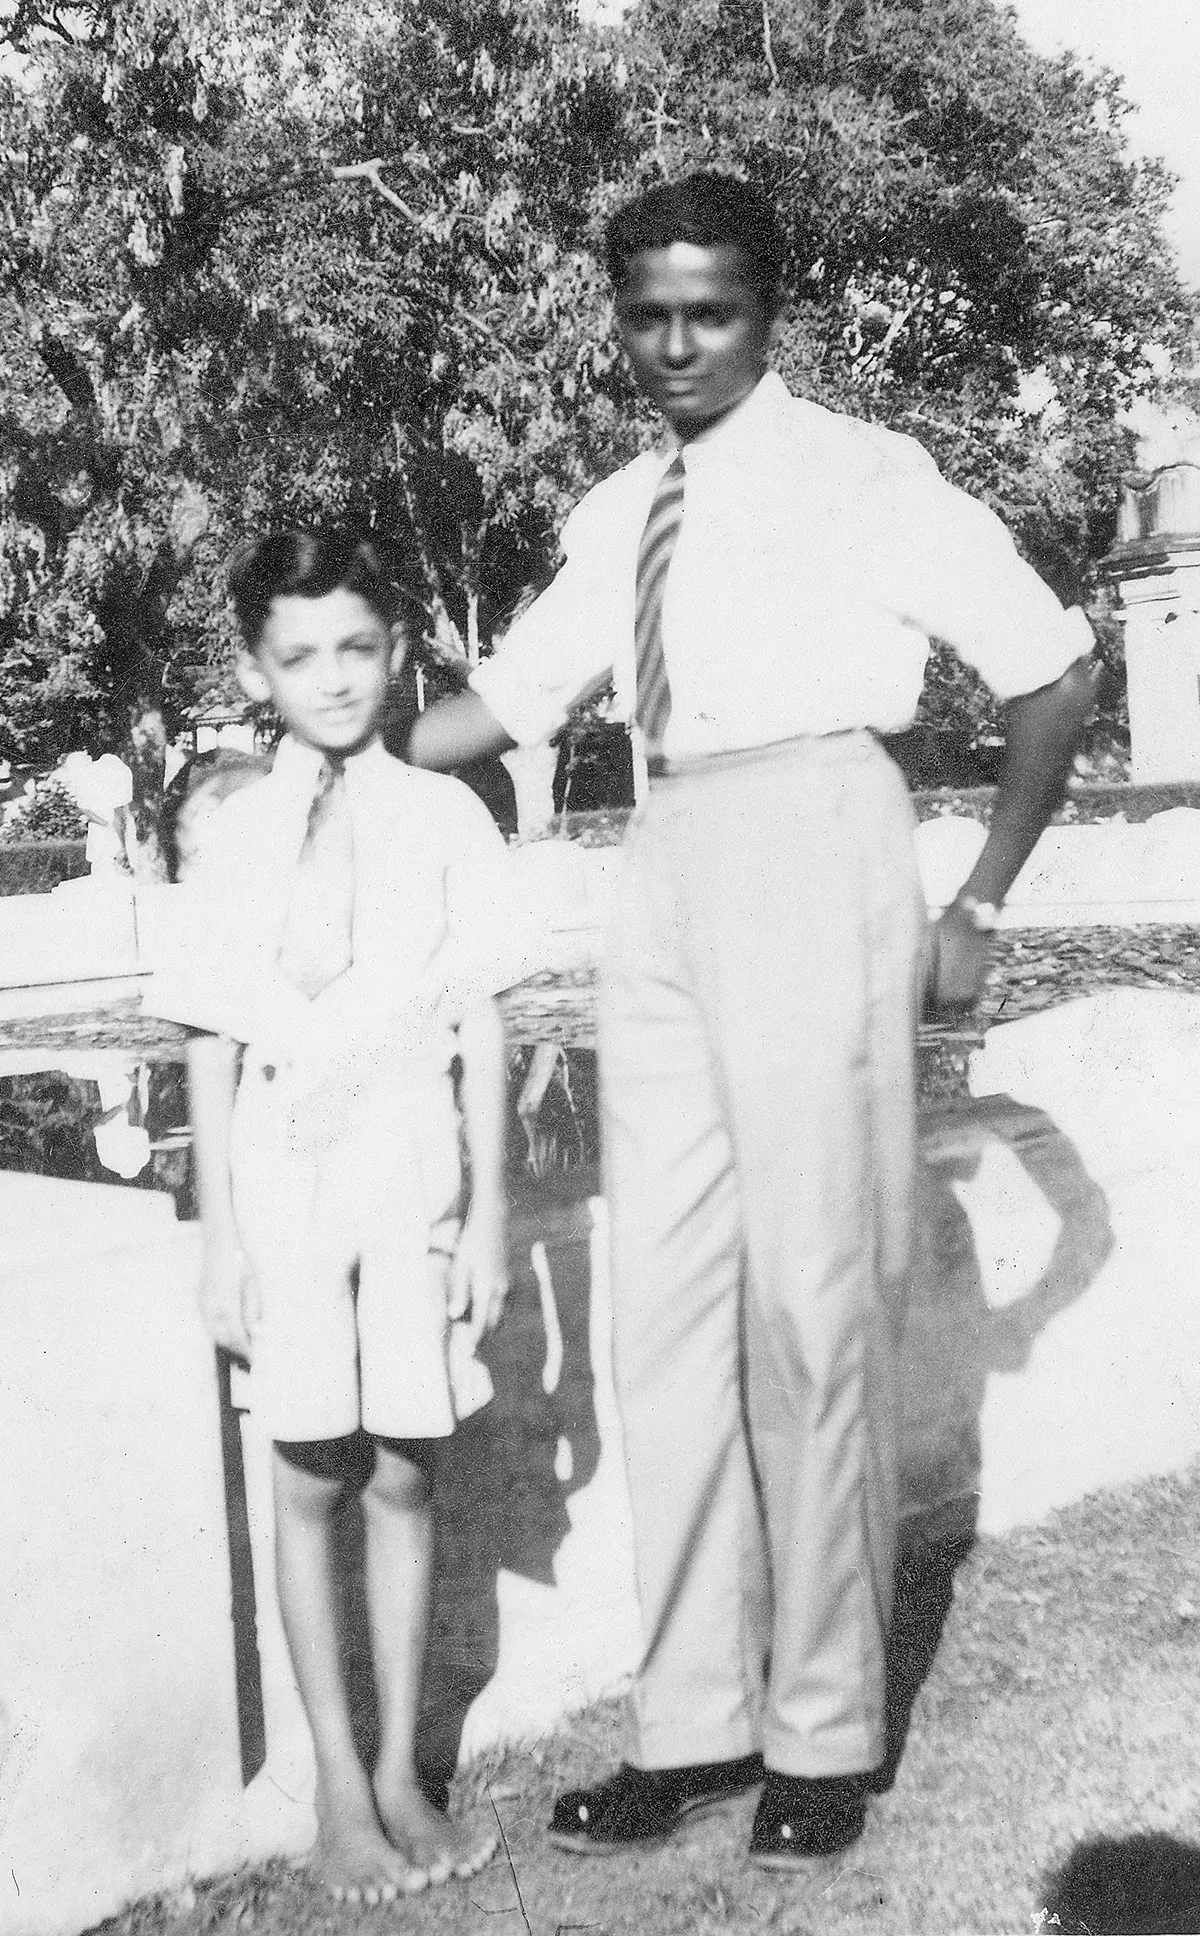 1951, at an Age of 7